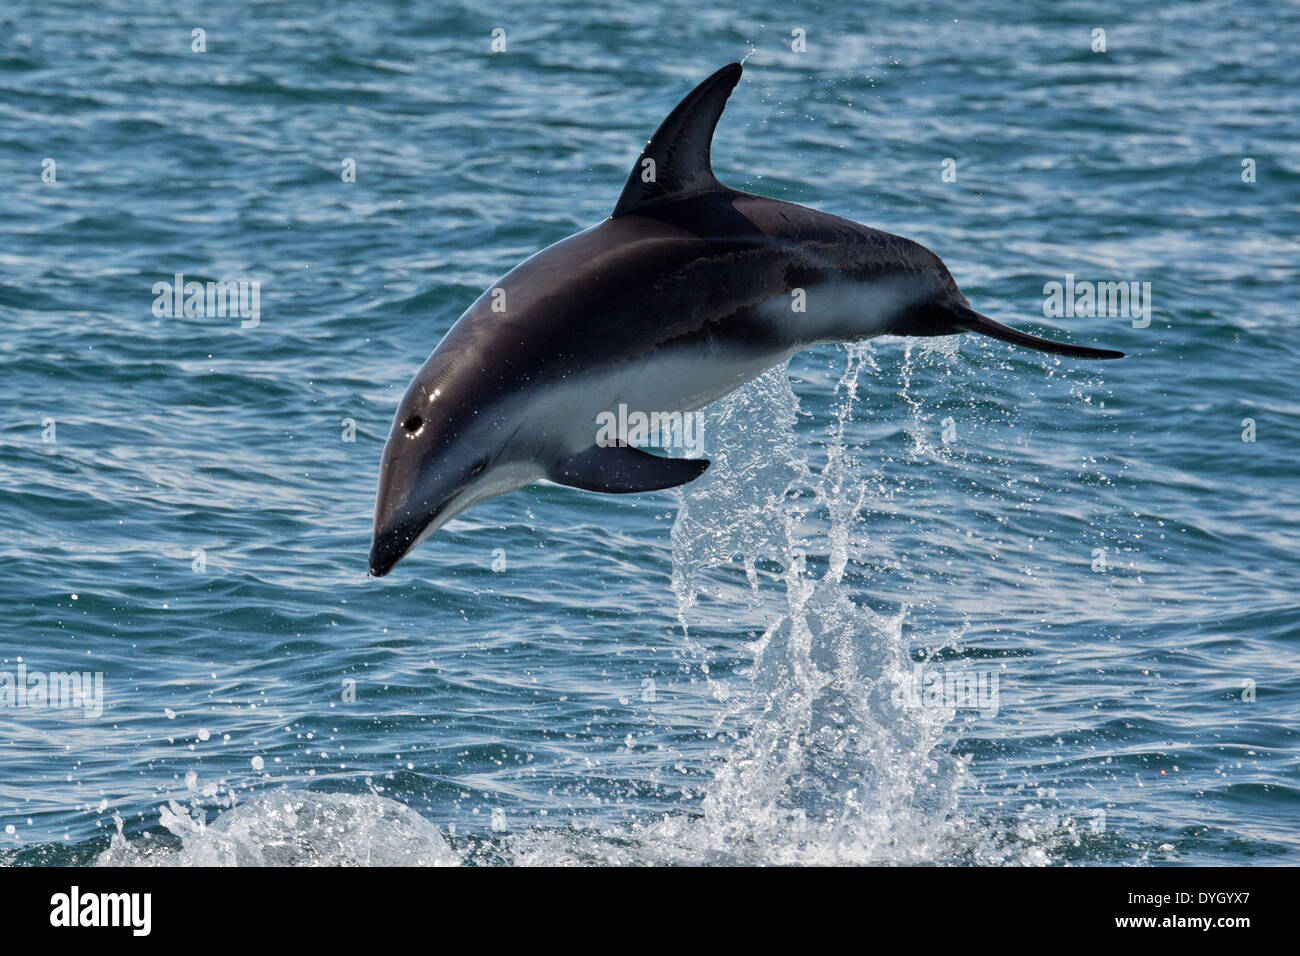 African Dusky dolphin (Lagenorhynchus obscurus obscurus). Jumping high in the air near Walvis Bay, Namibia. Stock Photo